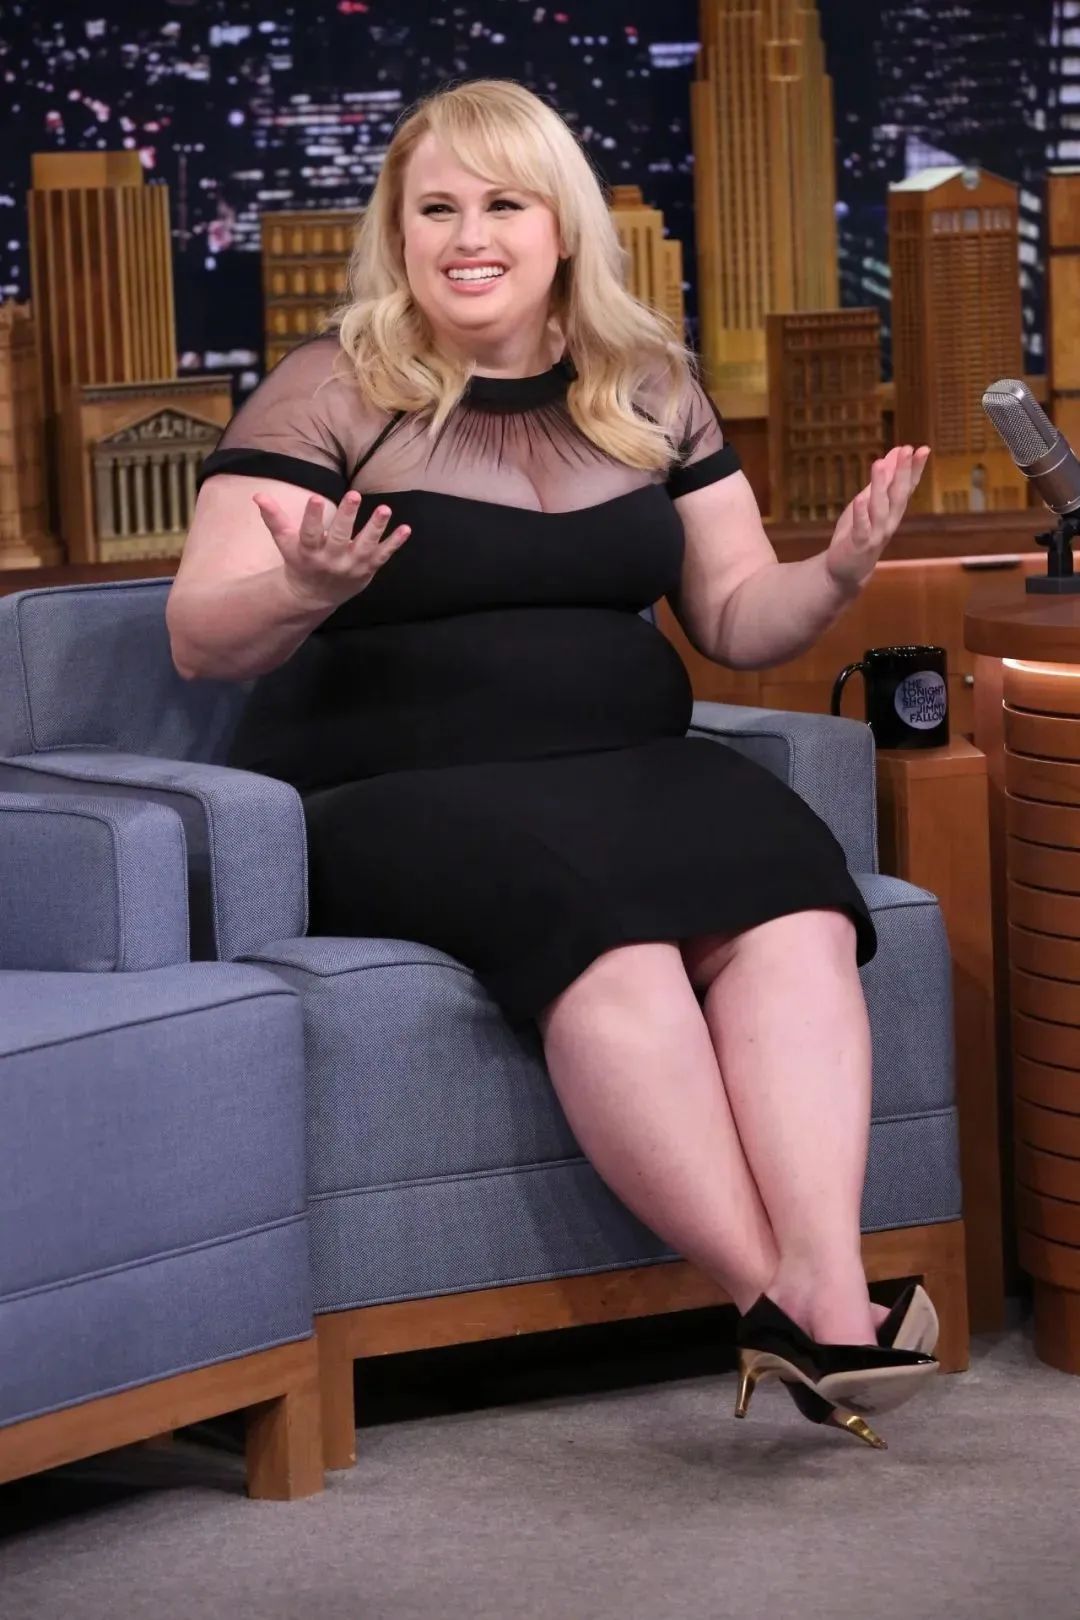 Admitted to taking semaglutide and lost 36 kilograms! Hollywood actress Rebel Wilson believes it can effectively control appetite